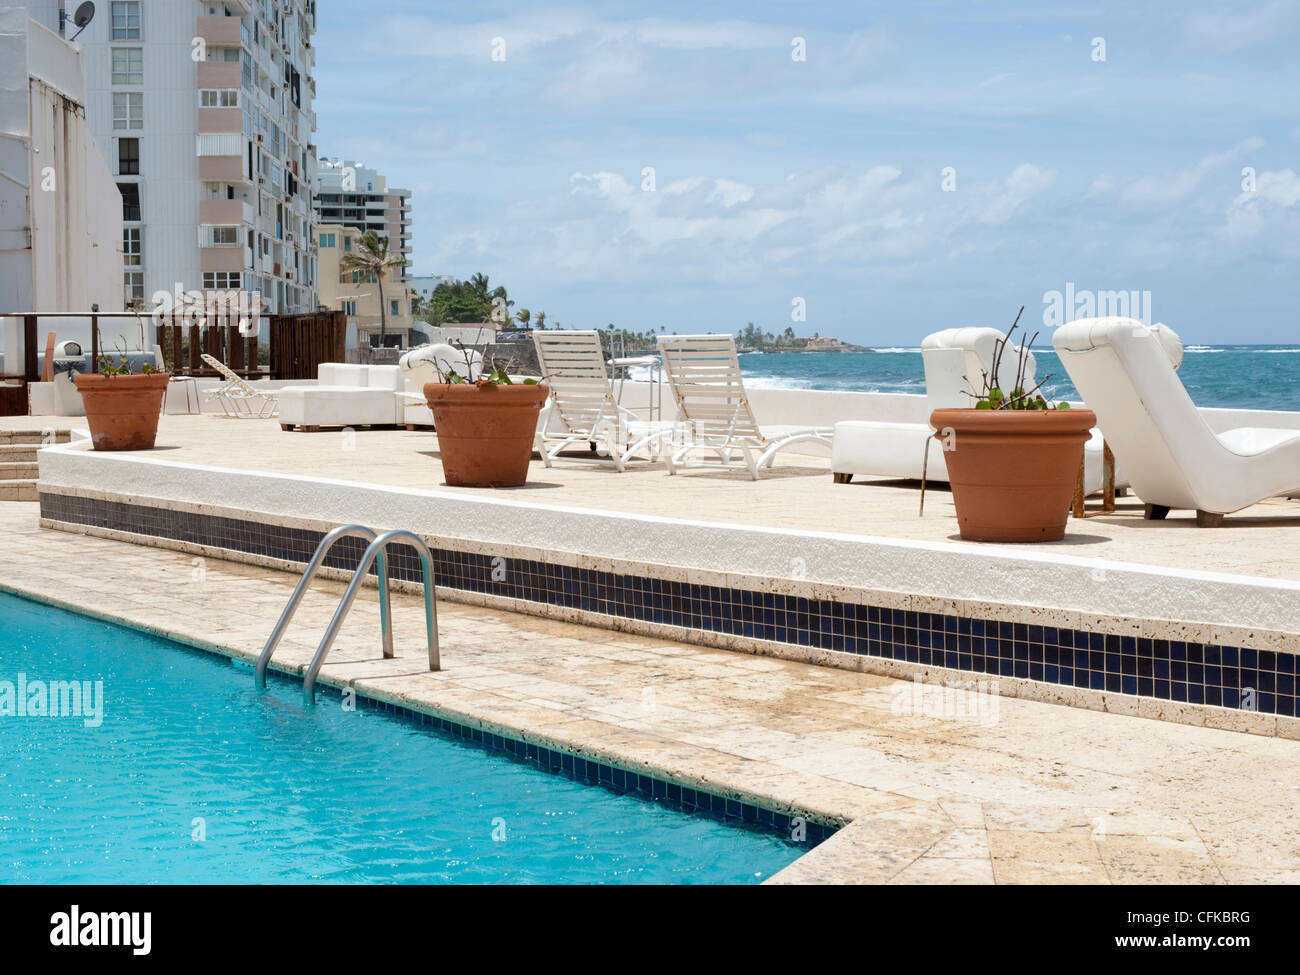 The corner of a swimming pool at the edge of the sea beside run down hotels in San Juan Puerto Rico Stock Photo